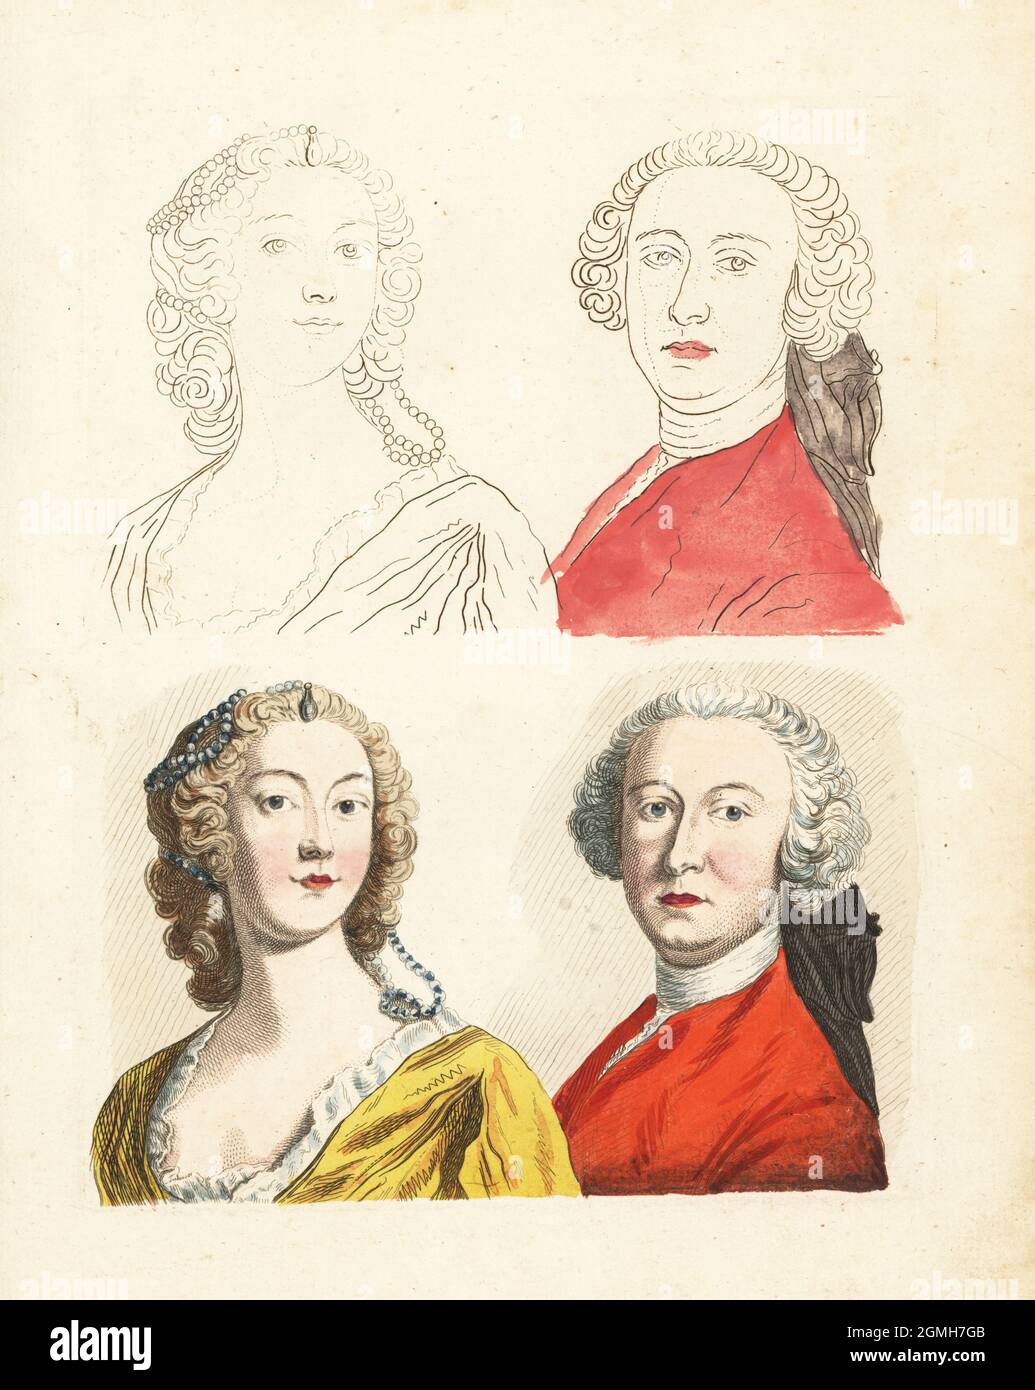 Figures from an 18th century colouring book. Professionally coloured examples and partially coloured versions. Handcoloured copperplate engraving from Robert Sayer’s The Artist’s Vade Mecum, Being the Whole Art of Drawing, London, 1766. Stock Photo